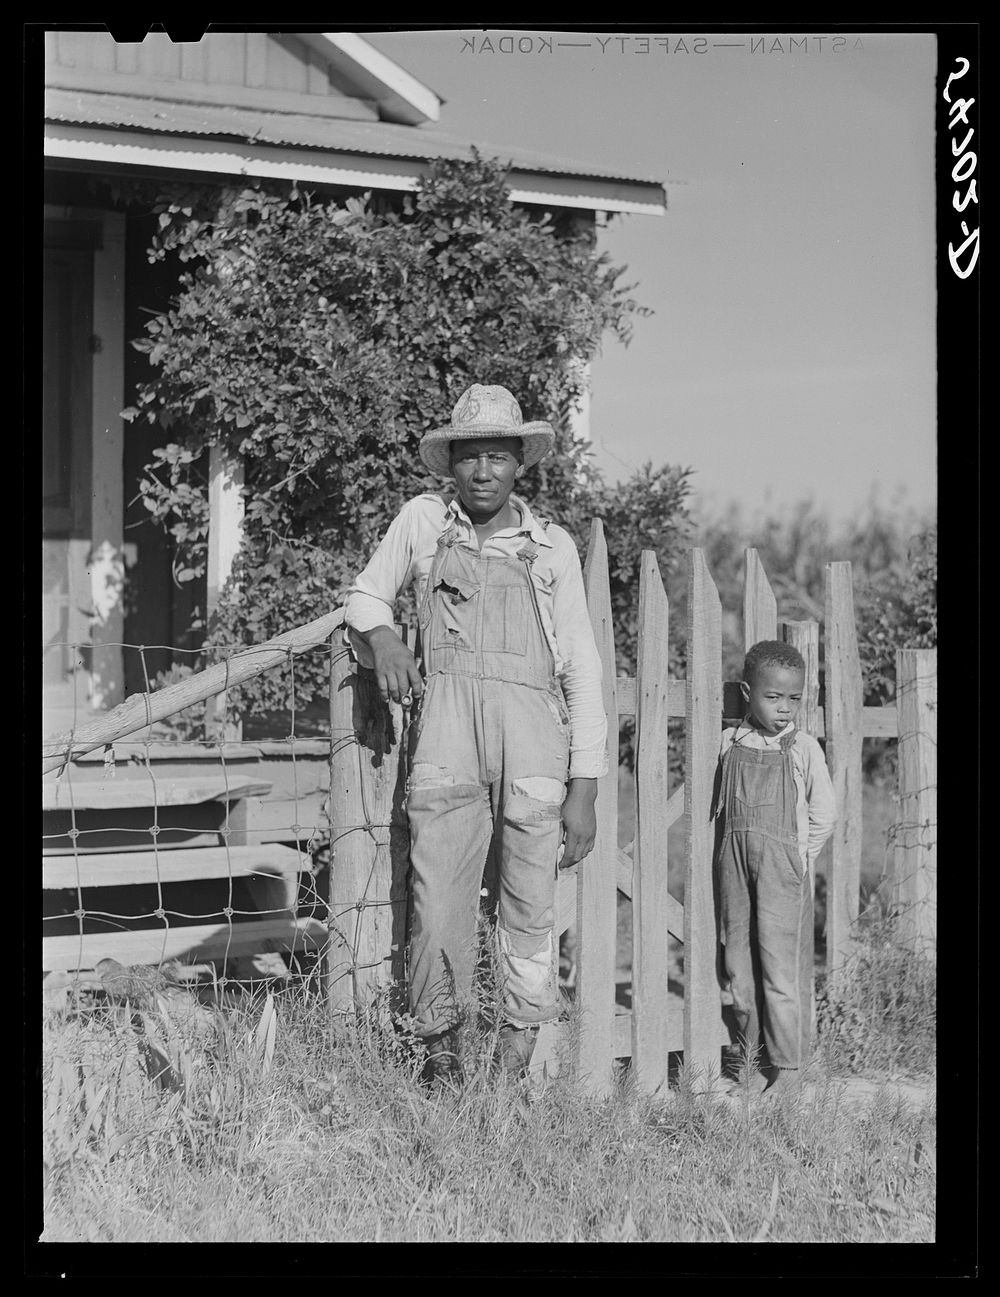 King and Anderson Plantation, Clarksdale, Mississippi Delta, Mississippi. Sourced from the Library of Congress.